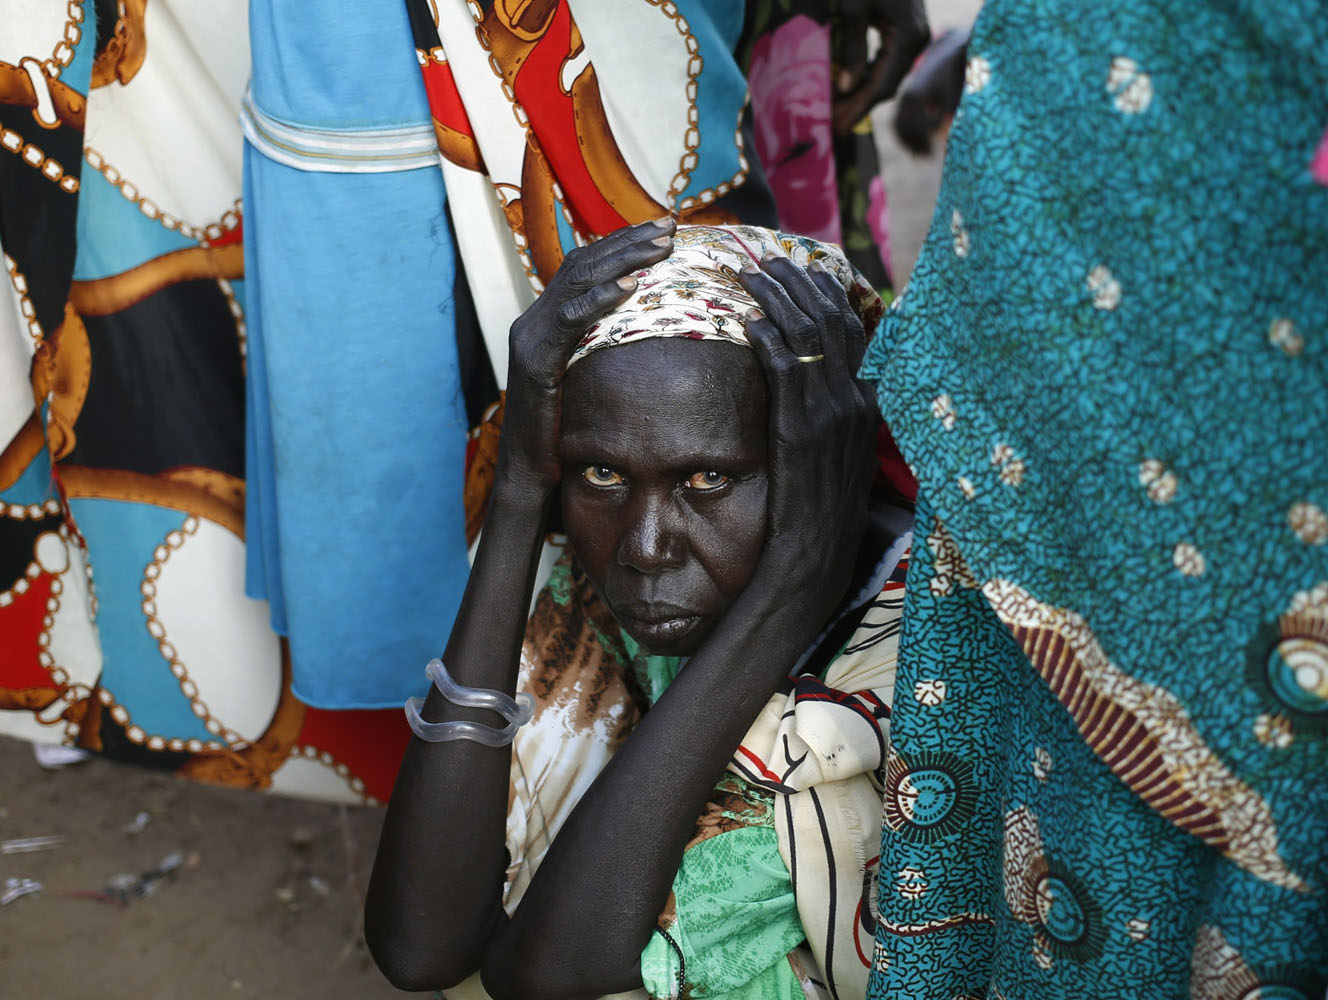 A women waits to vote in front of a polling station located in a school during a referendum in the town of Abyei